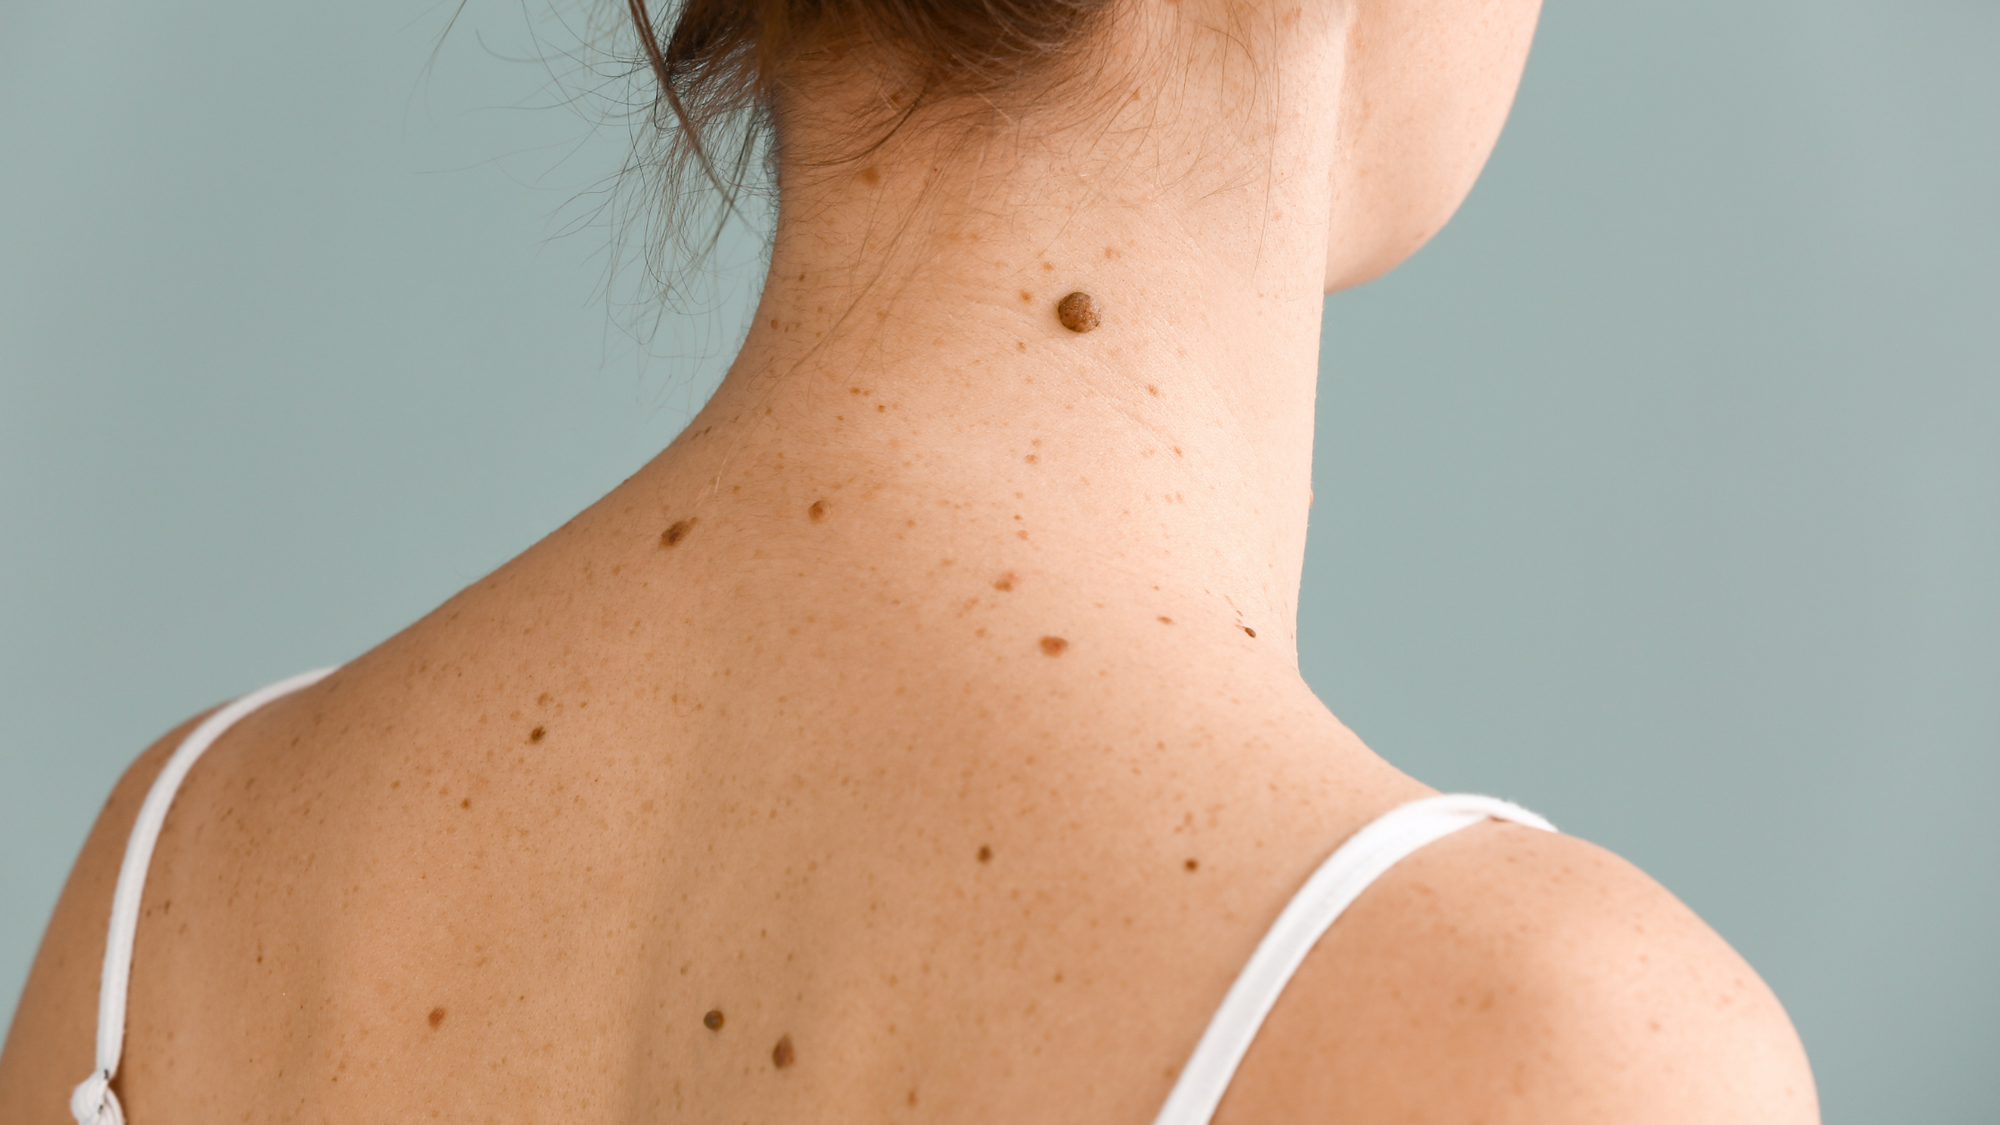 Why do I get moles on my skin?